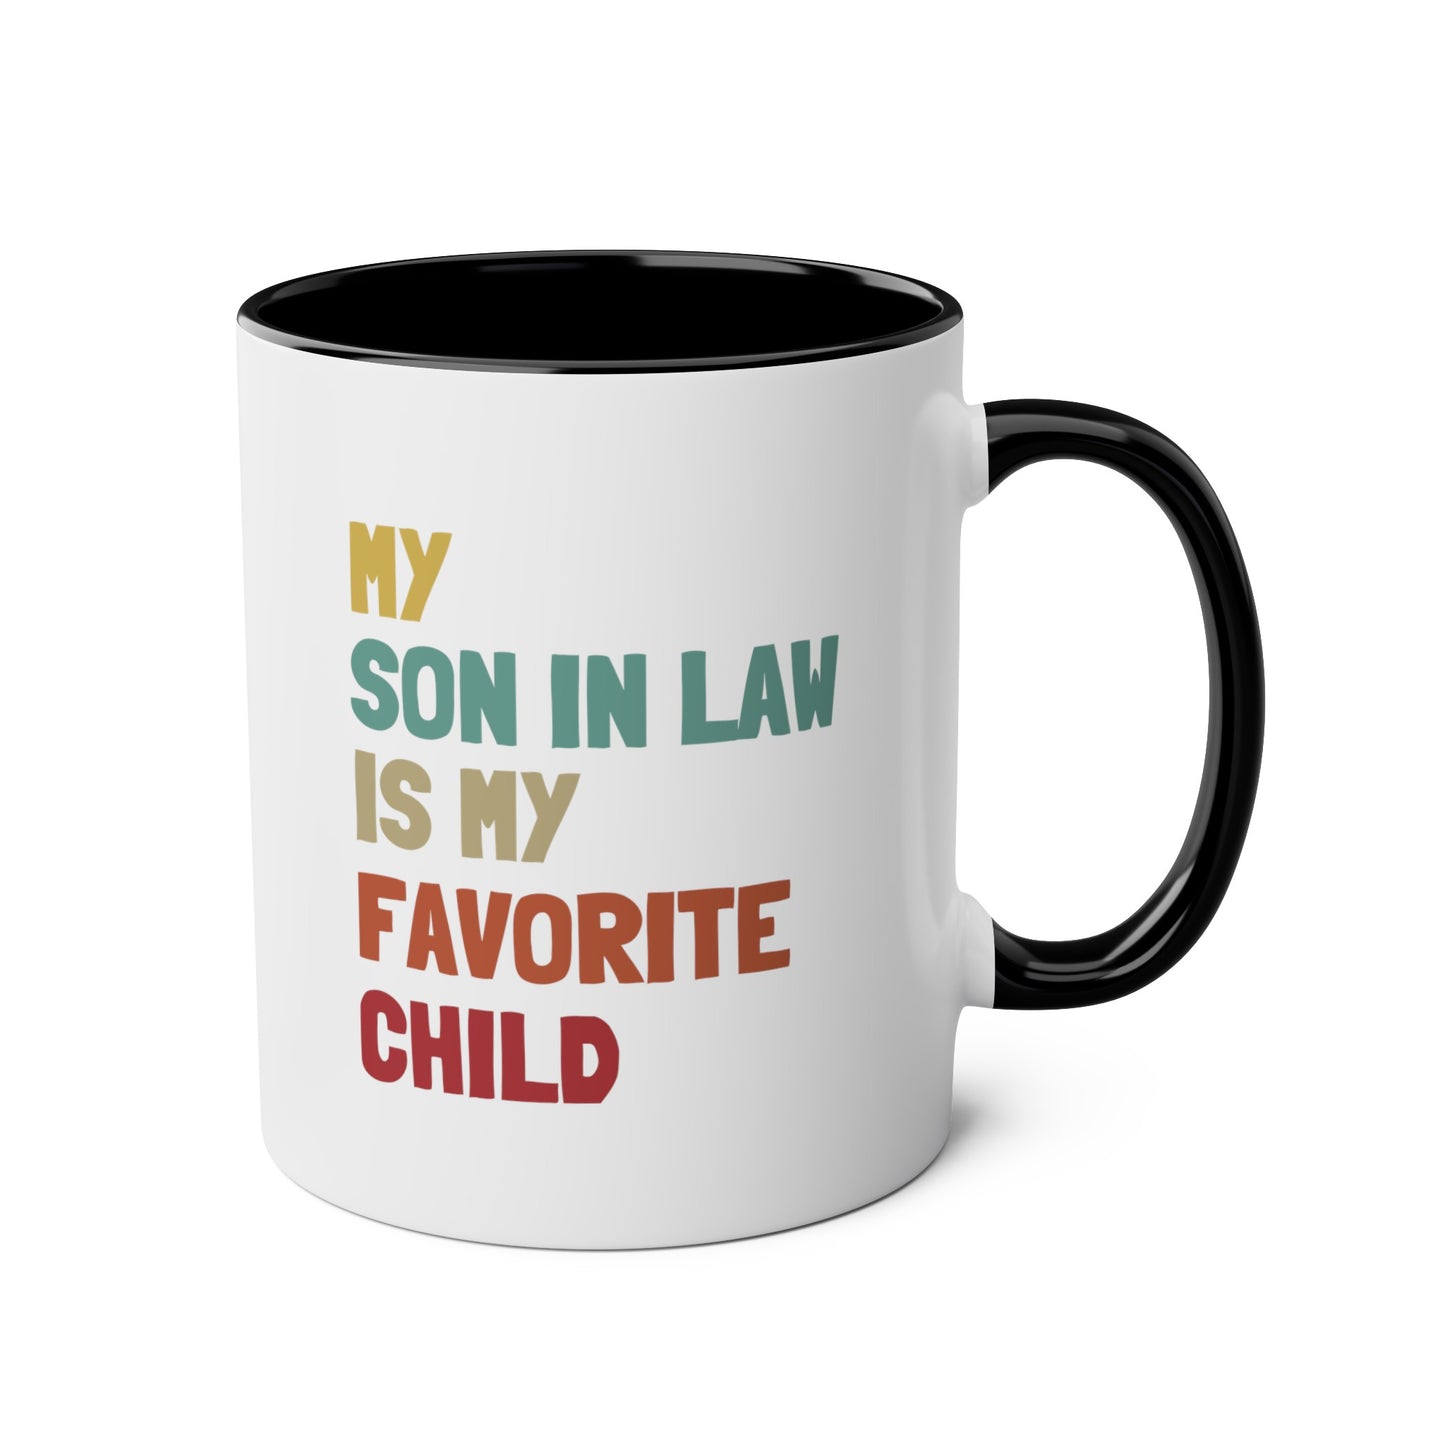 My Son In Law Is My Favorite Child 11oz white with black accent funny large coffee mug gift for mother's father's day waveywares wavey wares wavywares wavy wares